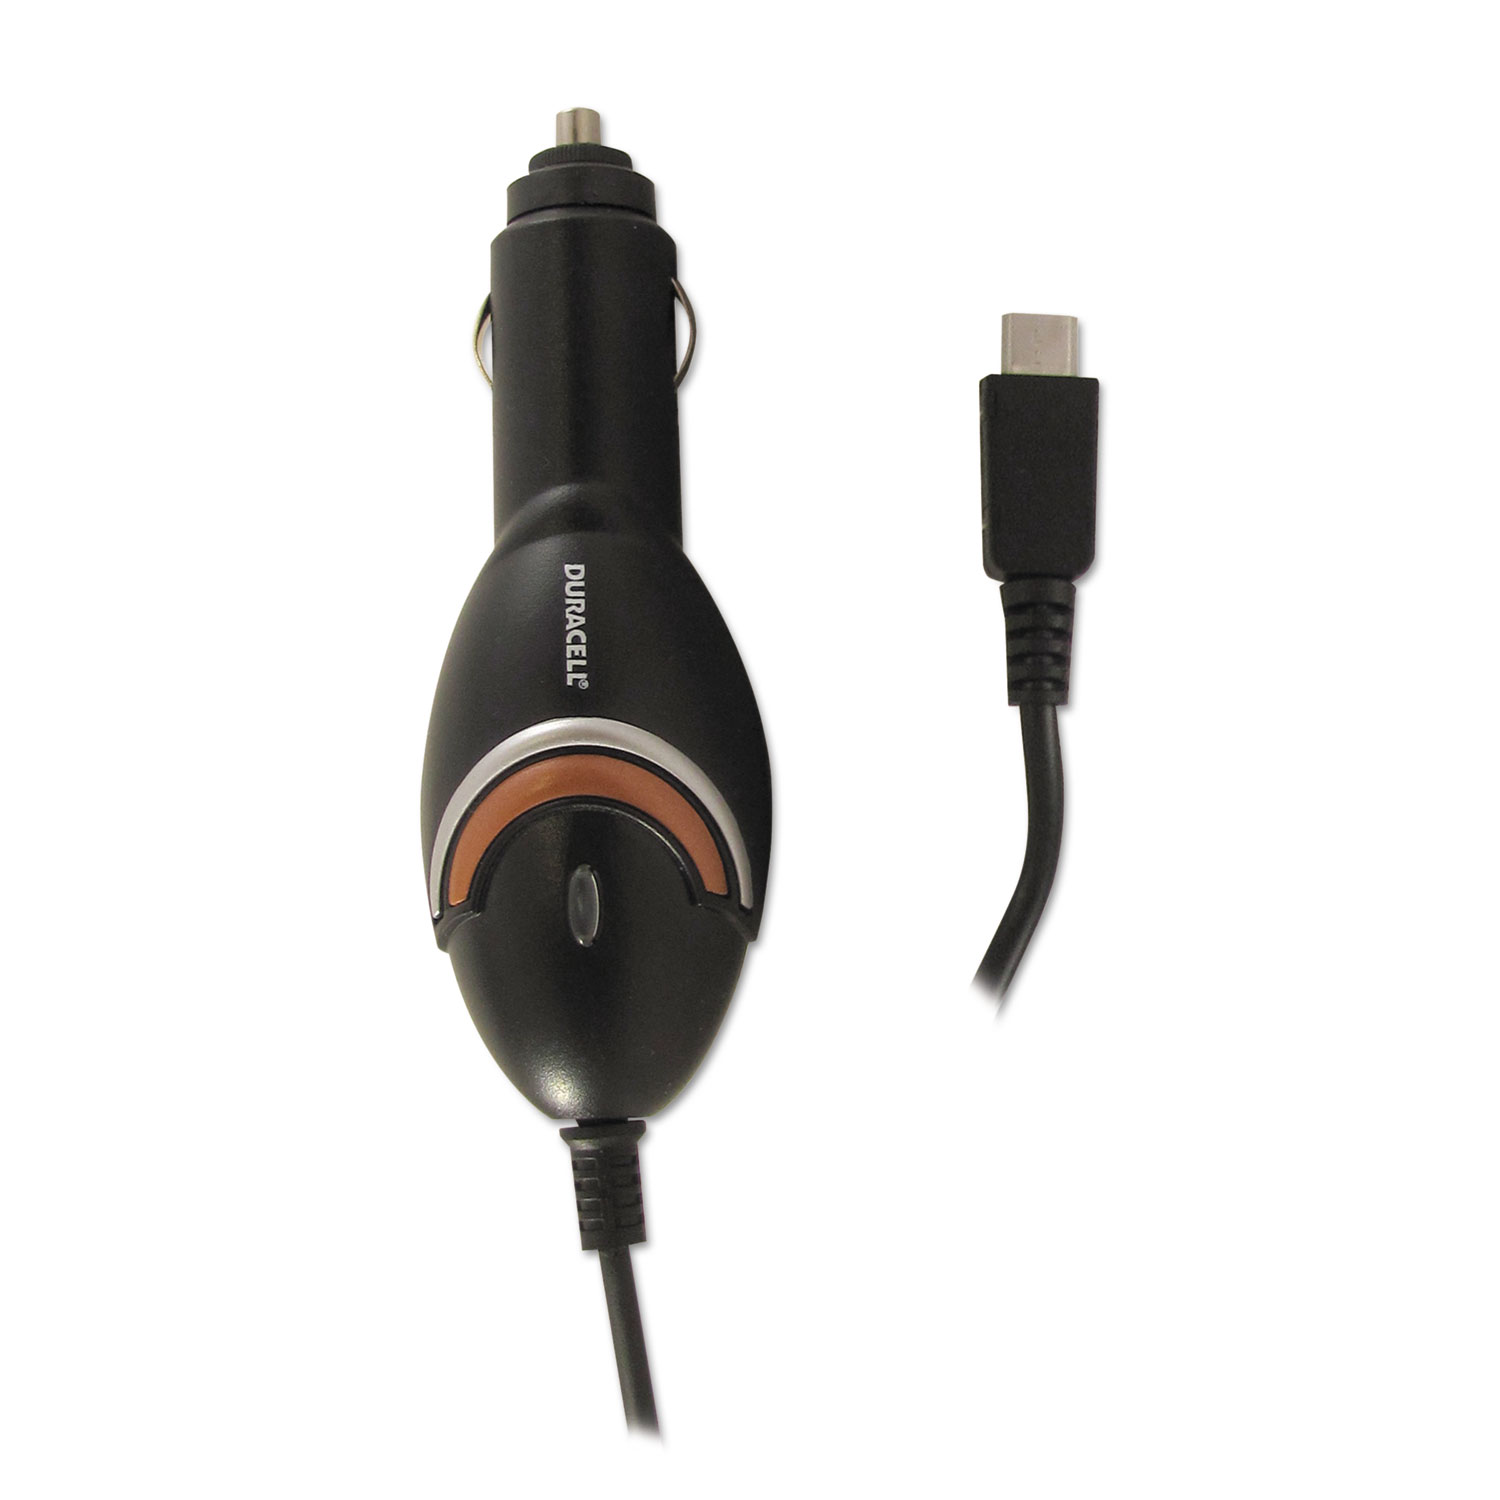  Duracell DC5341 Hi-Performance Car Charger for Micro USB Devices (ECADC5341) 